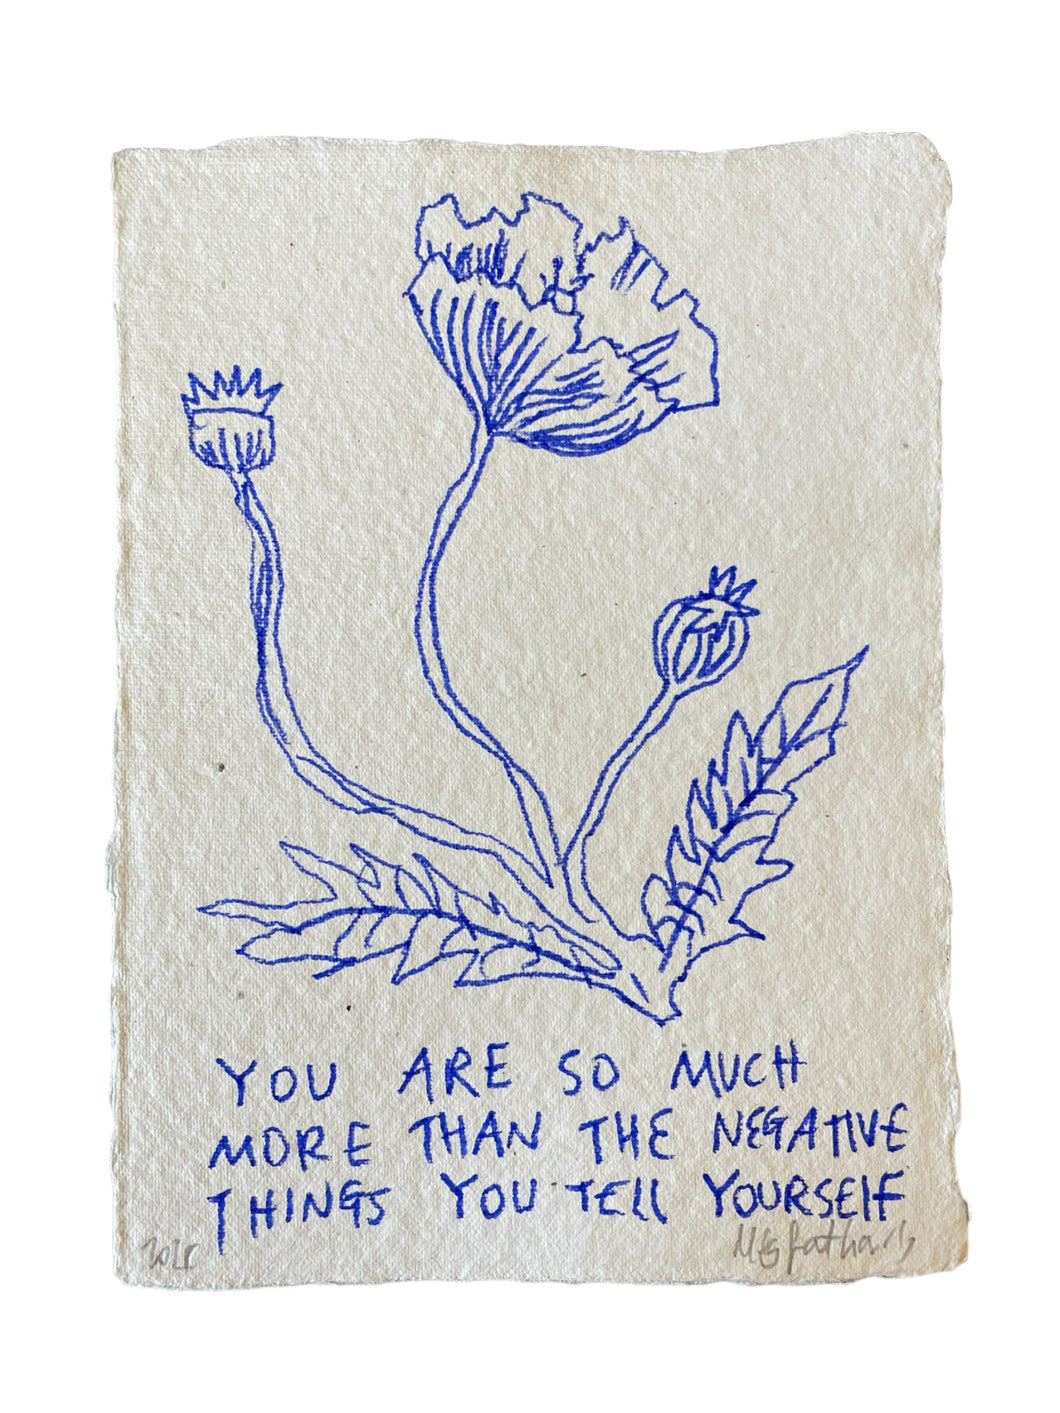 Original Ink Drawing Flower on handmade paper - you are so much more than the negative things you tell yourself